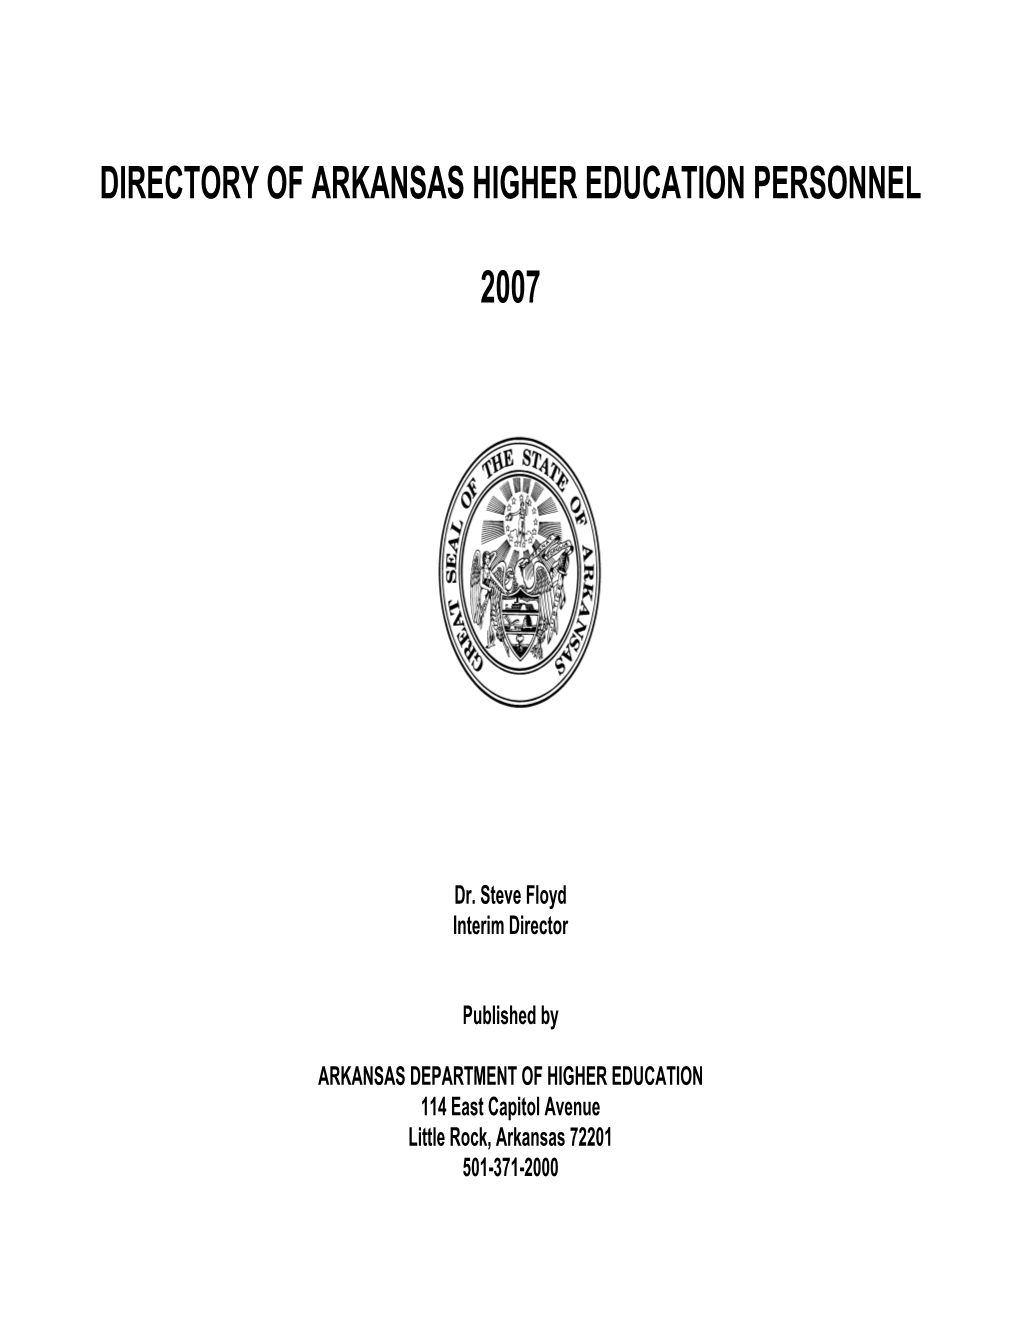 Directory of Arkansas Higher Education Personnel 2007